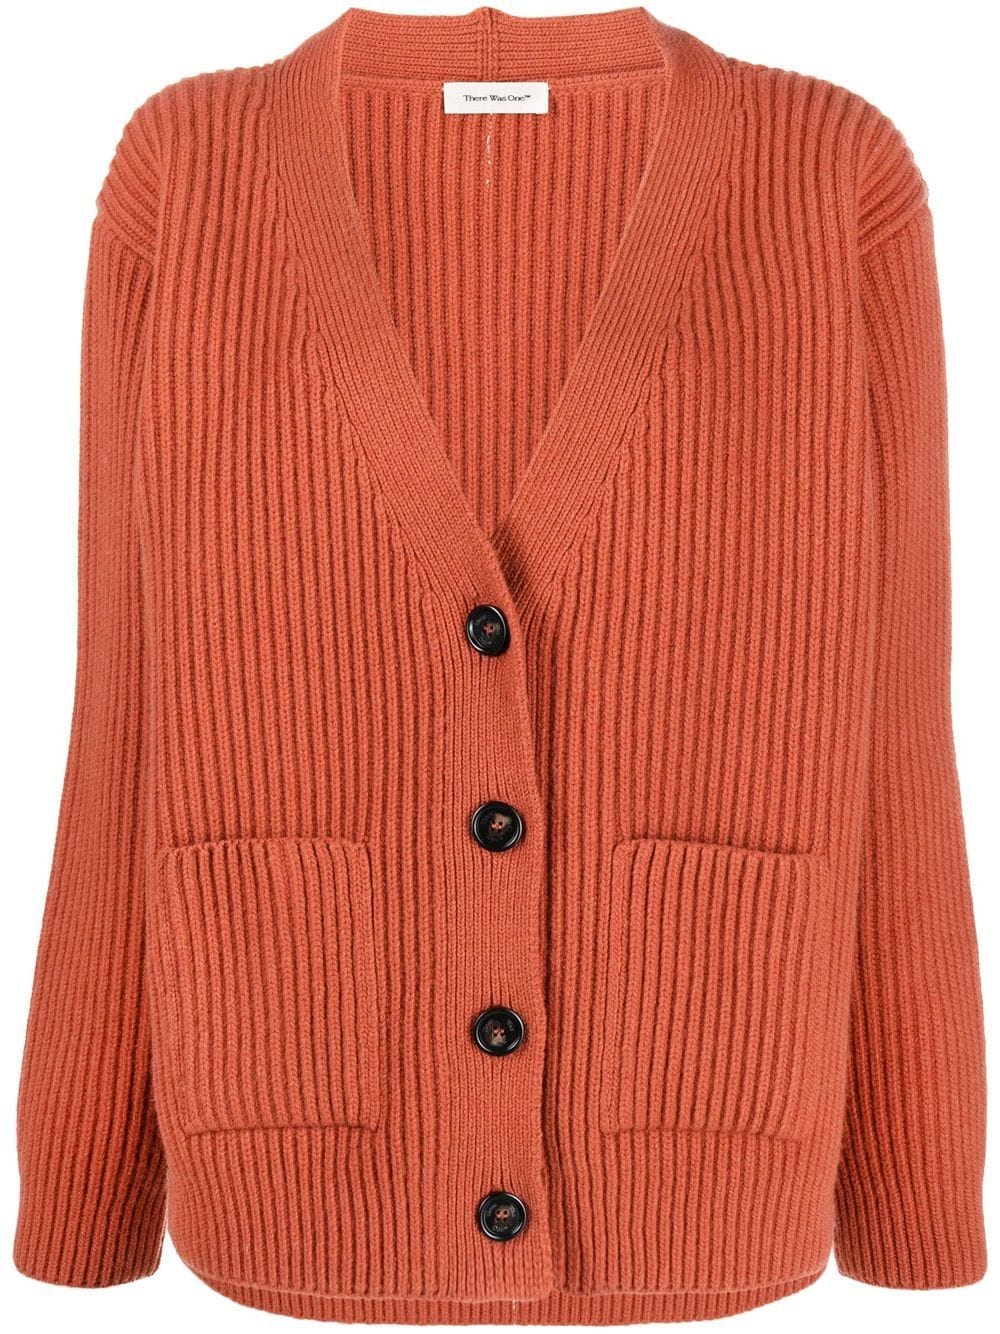 There Was One V-neck ribbed cardigan - Orange von There Was One